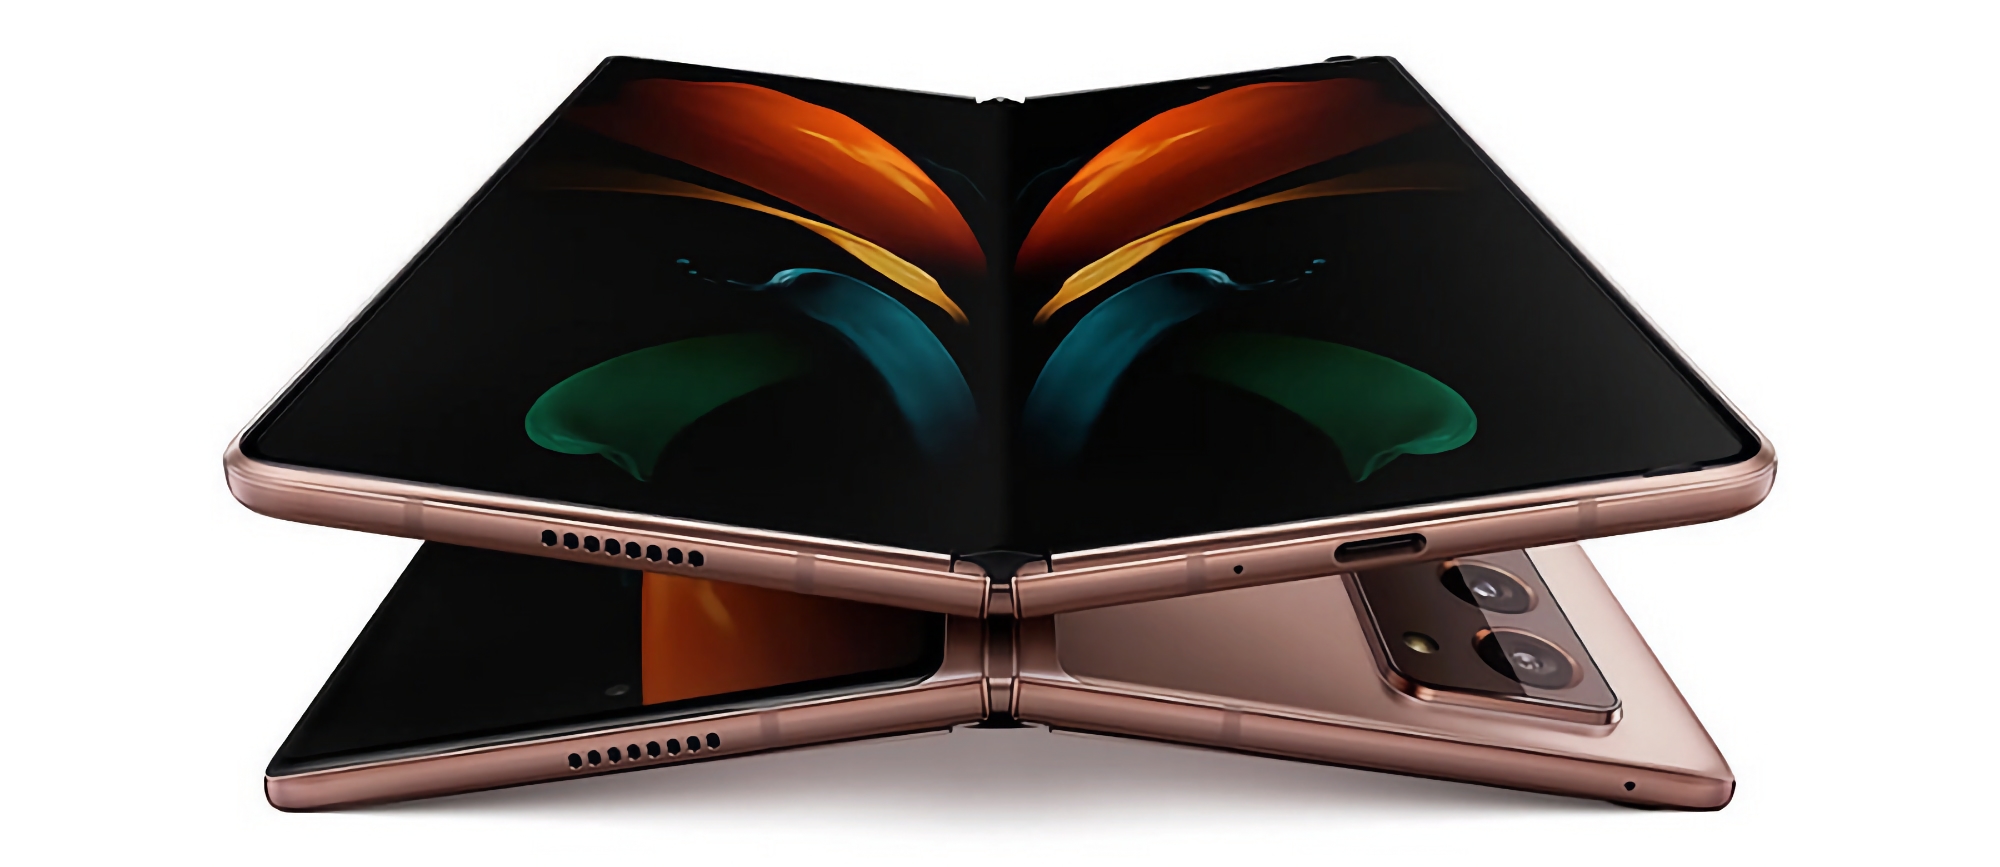 Samsung Galaxy Fold 2 foldable smartphone begins to receive new security update